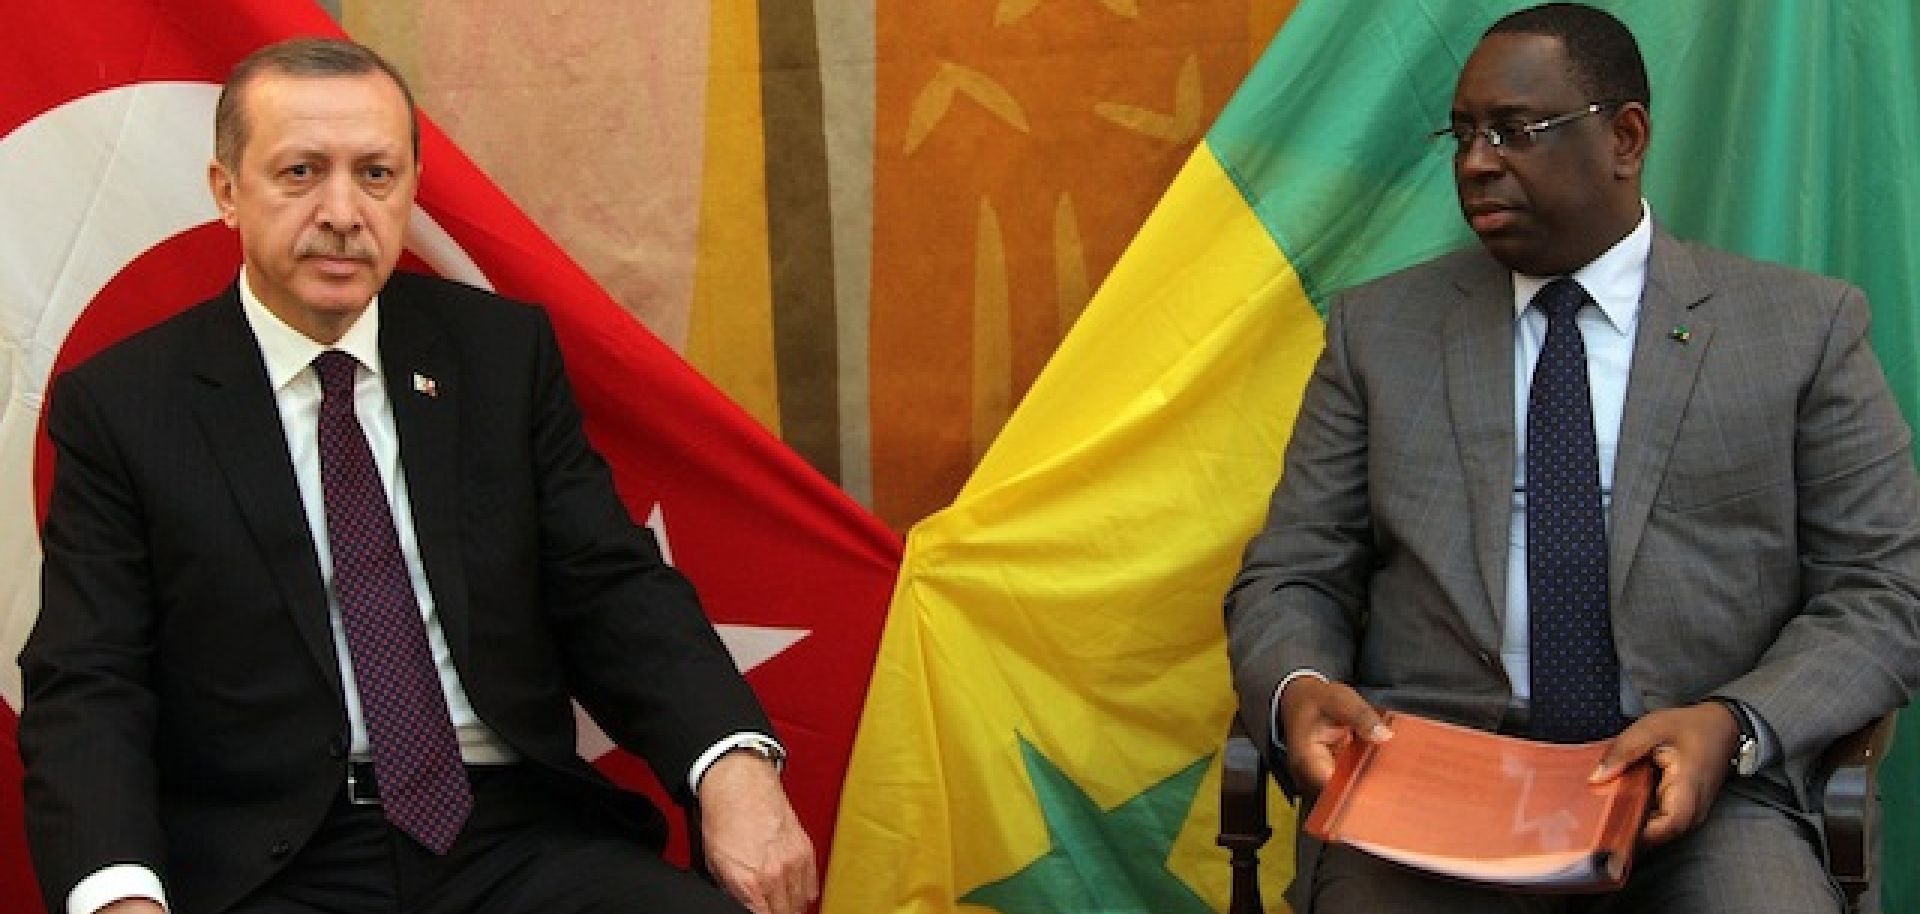 Turkey's Feud With Hizmet Could Upset Ankara's Africa Policy 